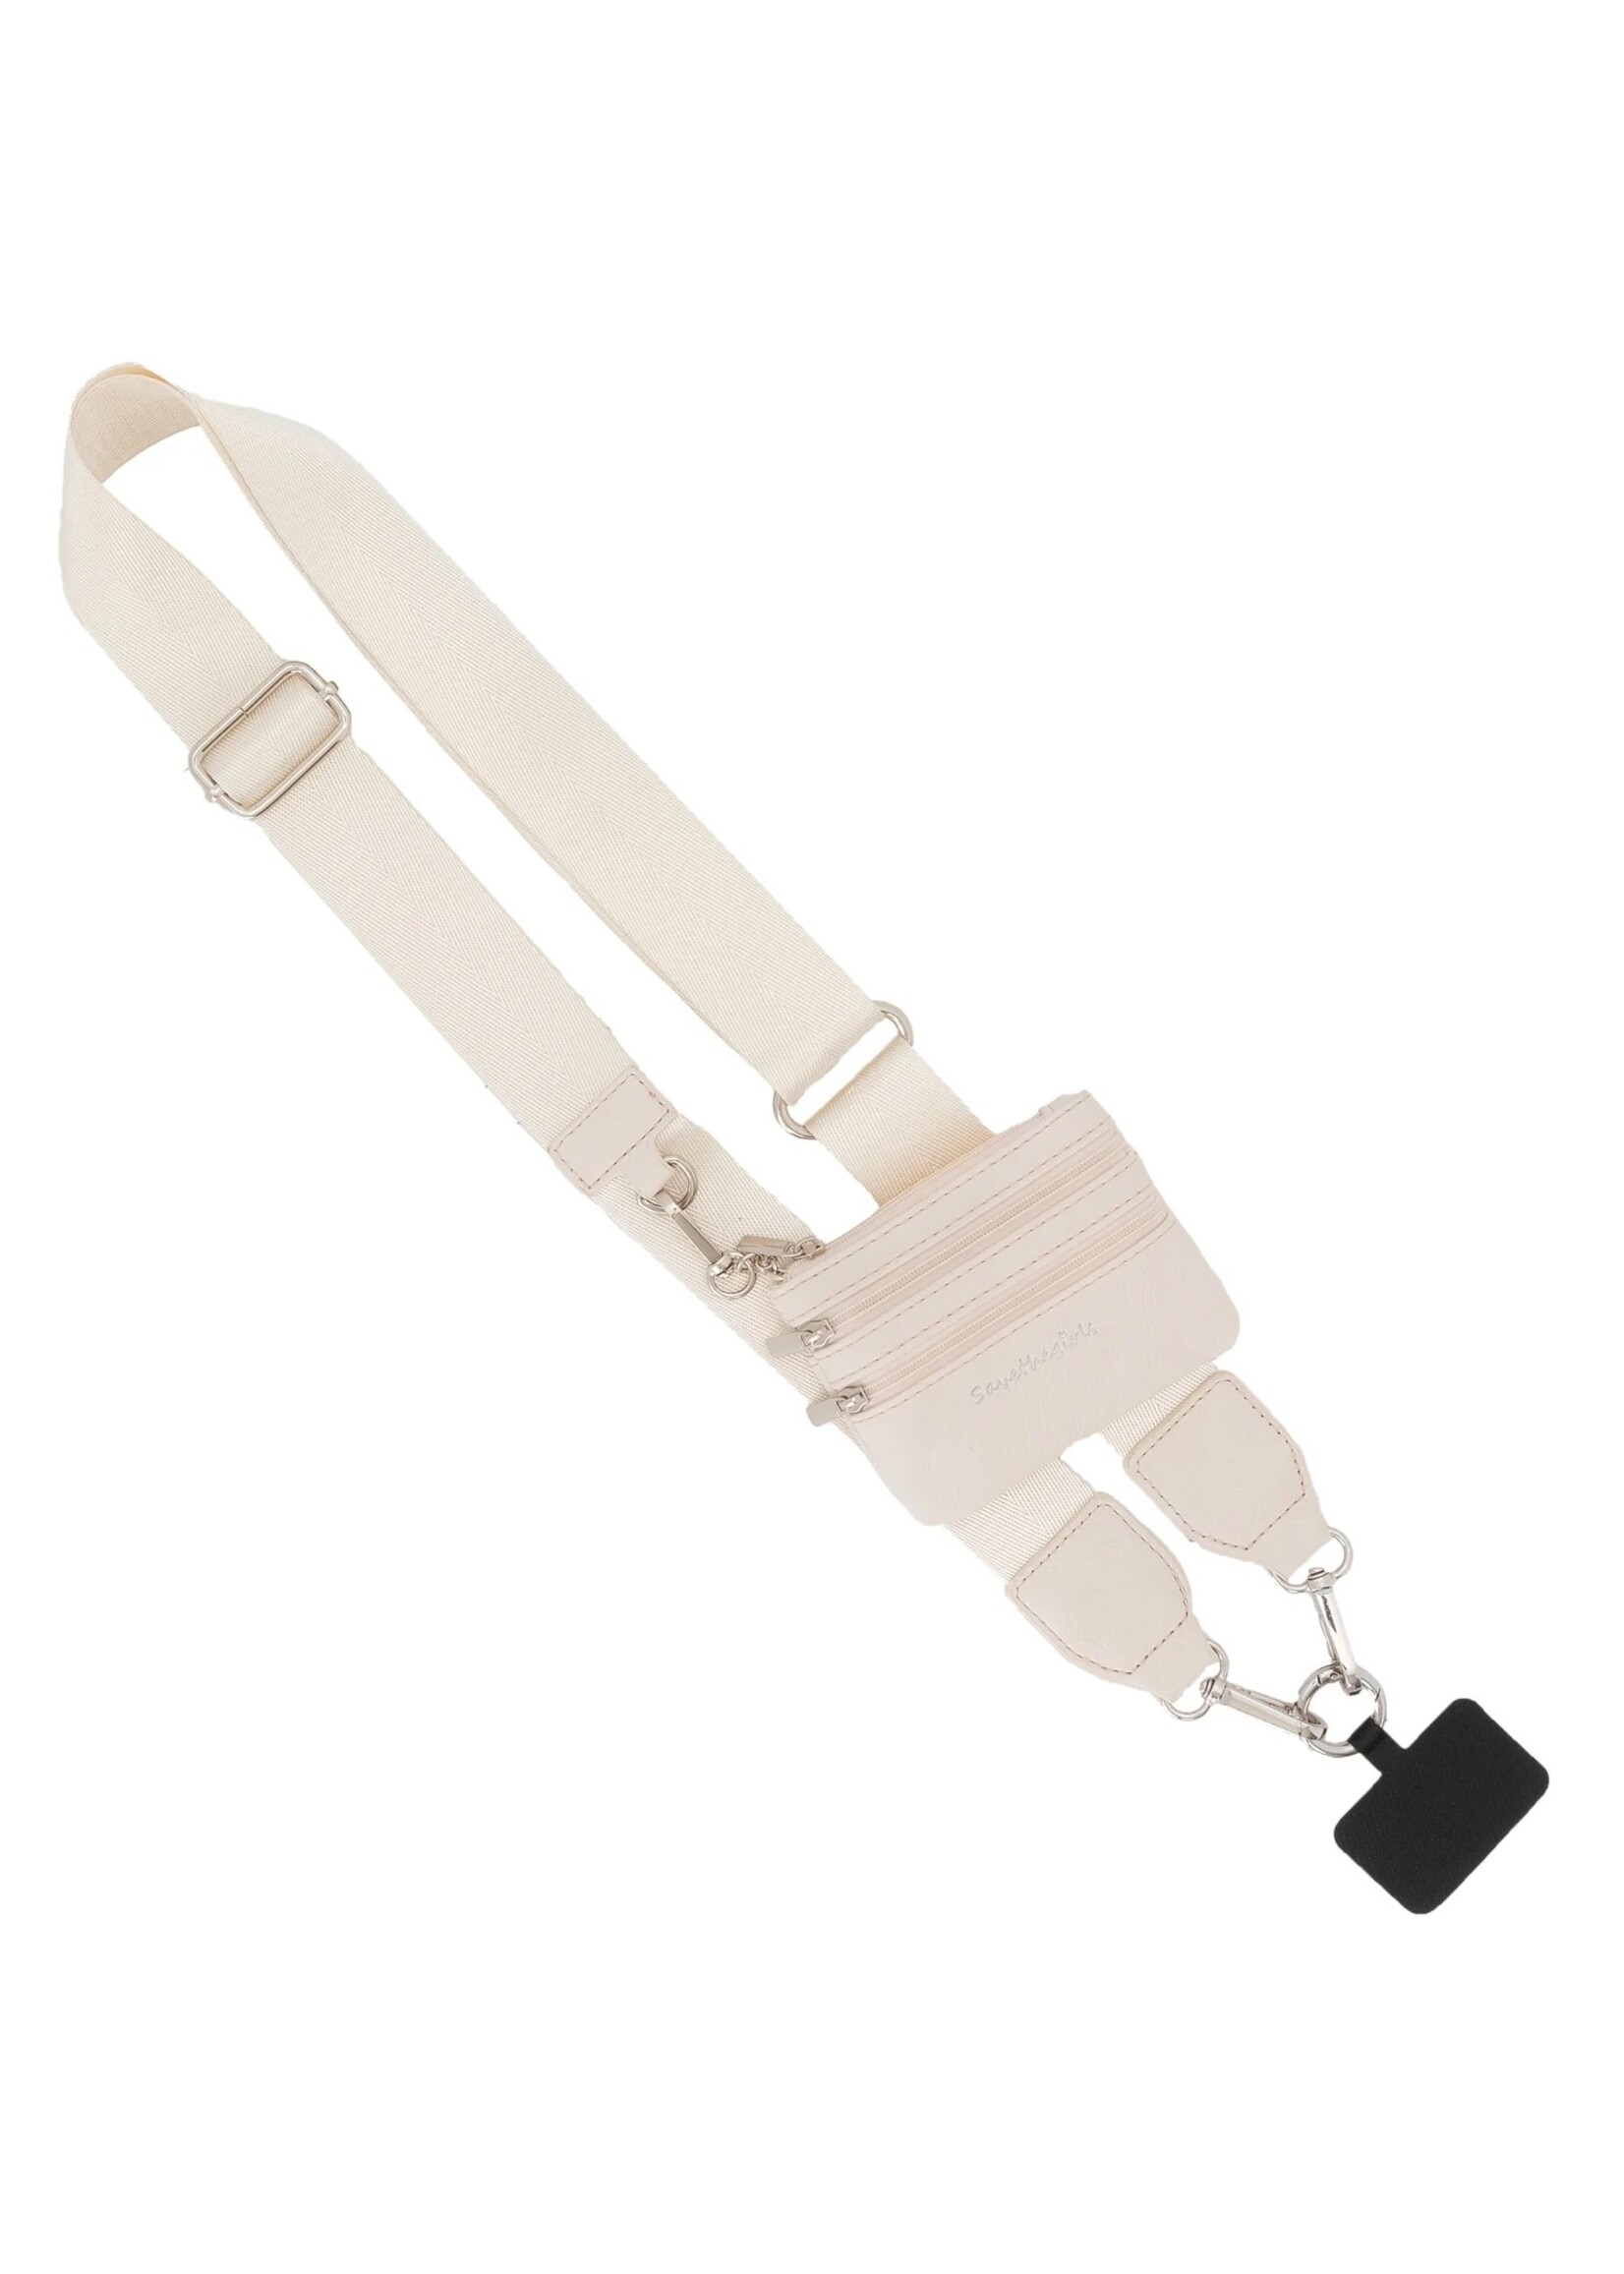 Save the Girls Clip & Go Strap with Pouch - Cream